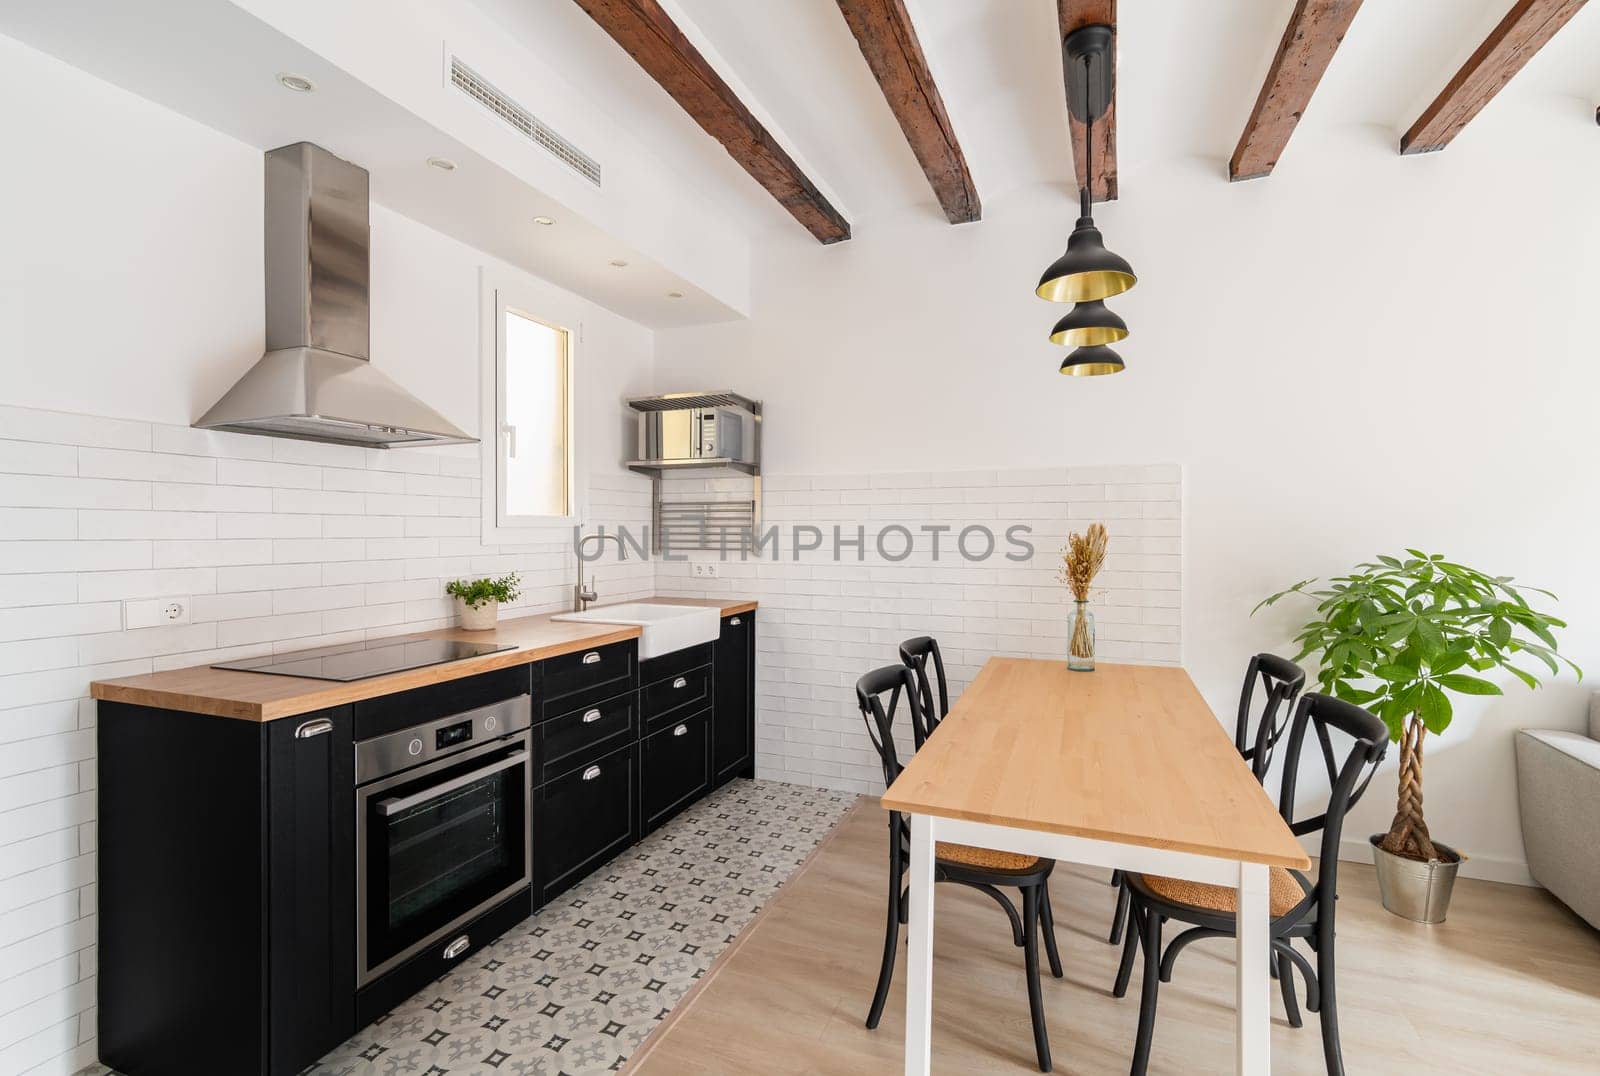 Cozy kitchen with wooden dining table and appliances in studio apartment. Comfortable cooking area with place to eat in house. Home interior